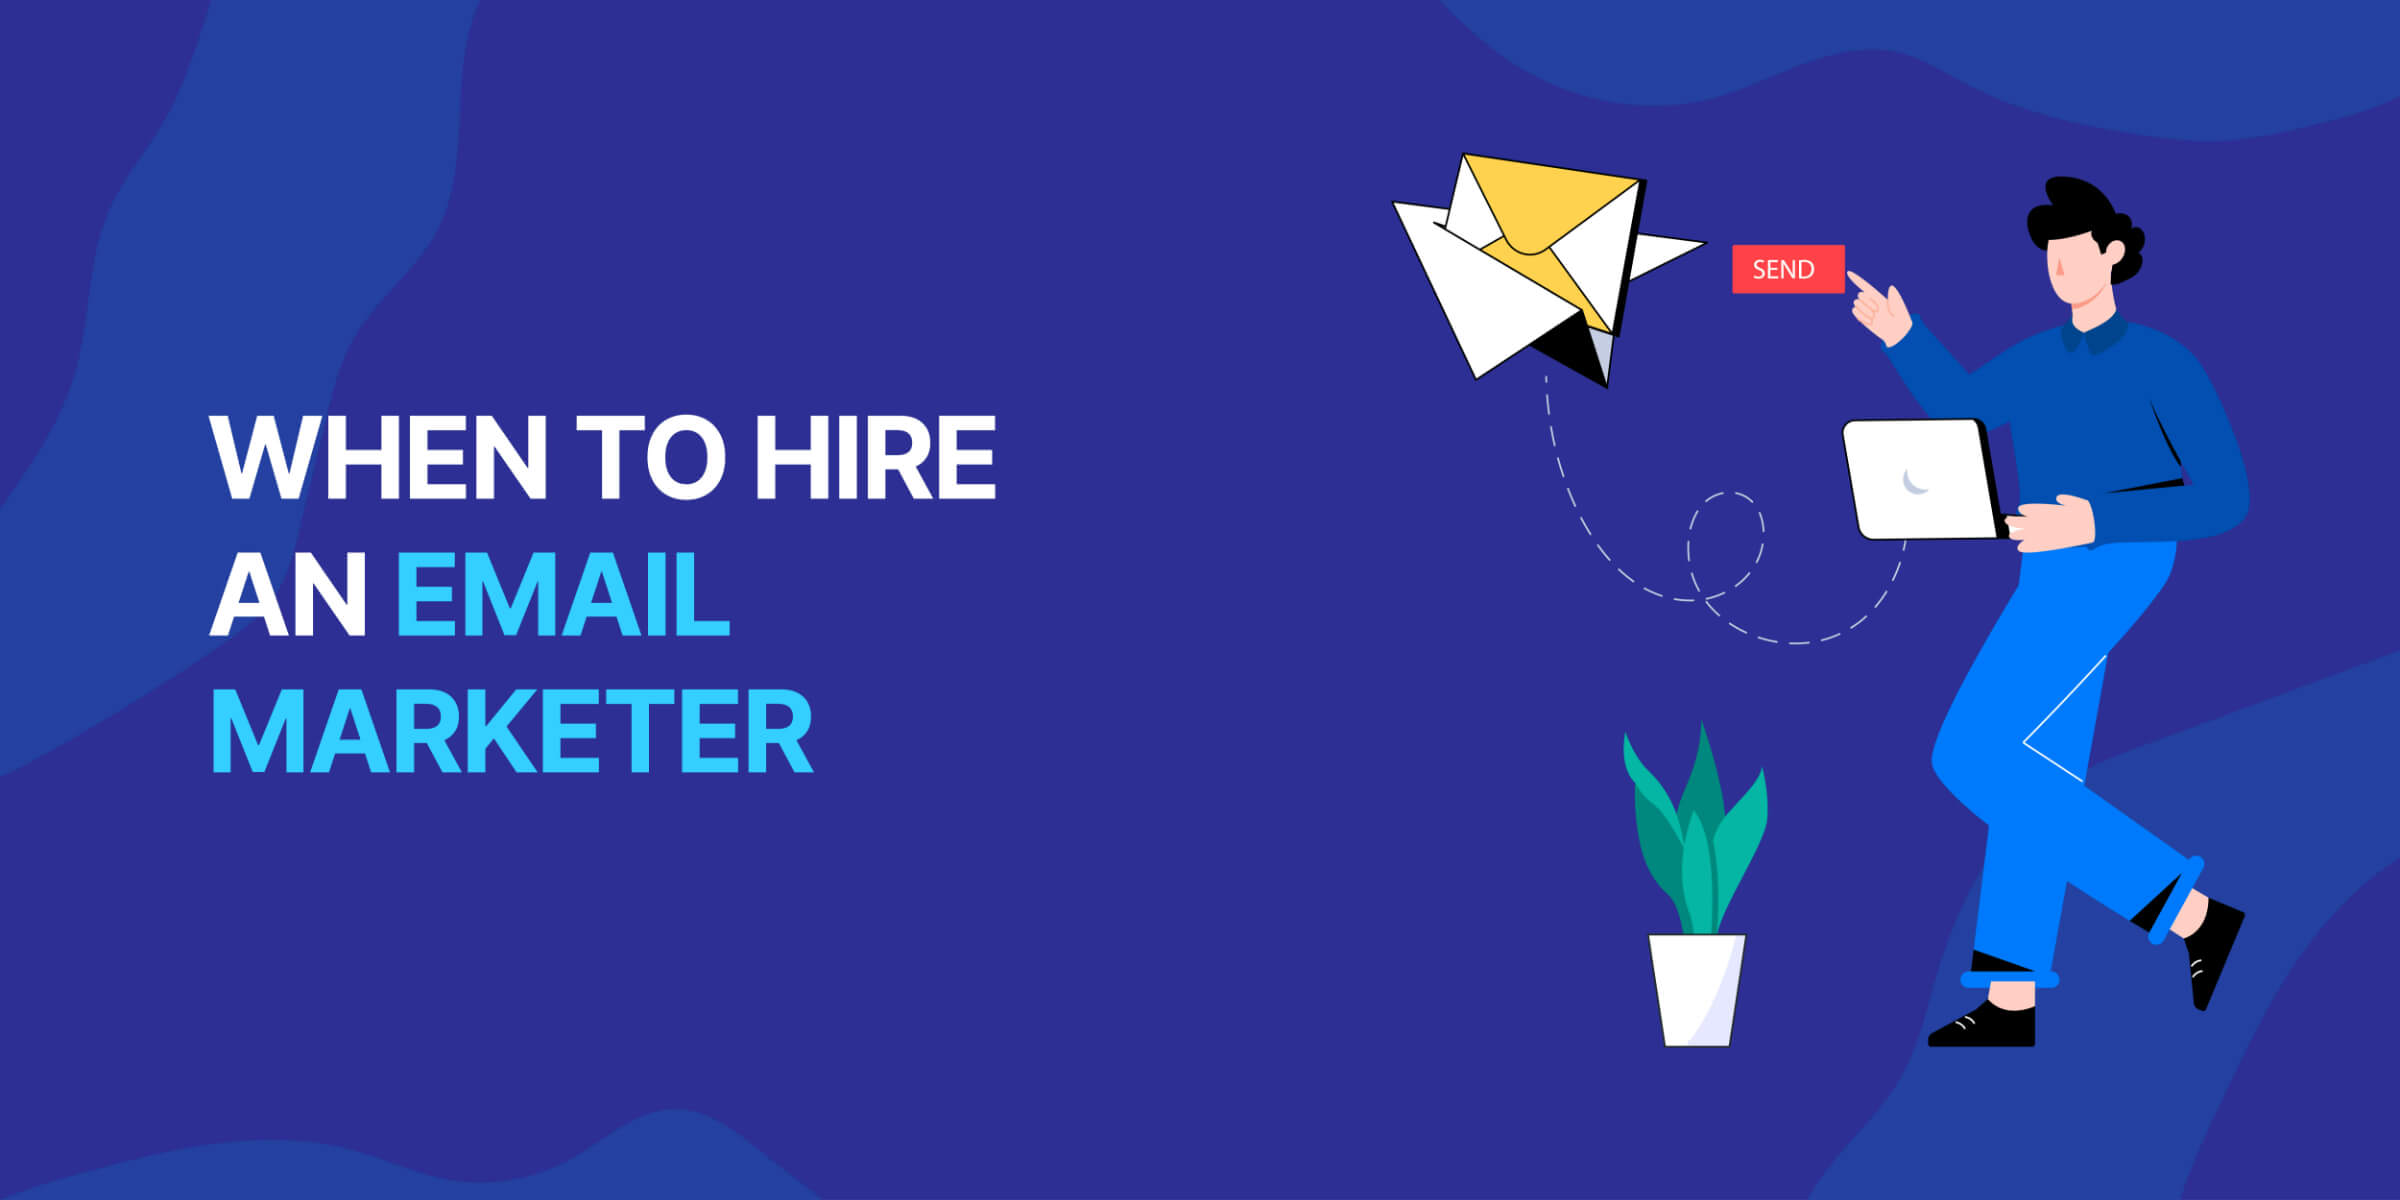 When to Hire Email Marketer